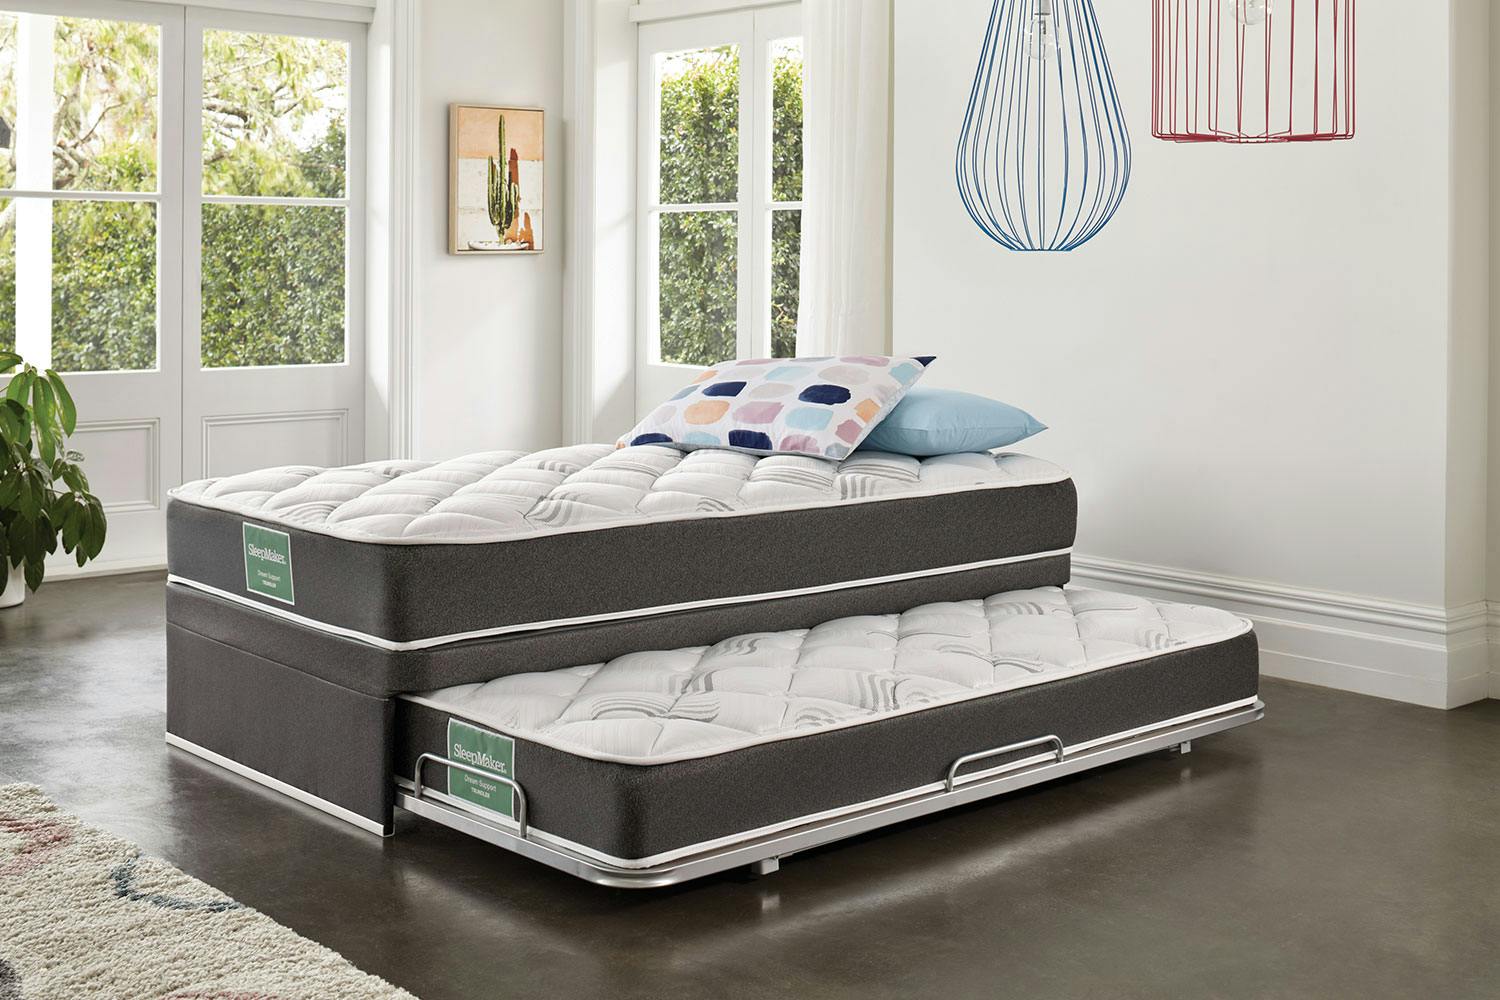 Dream Support King Single Trundle Bed by Sleepmaker | Harvey Norman New